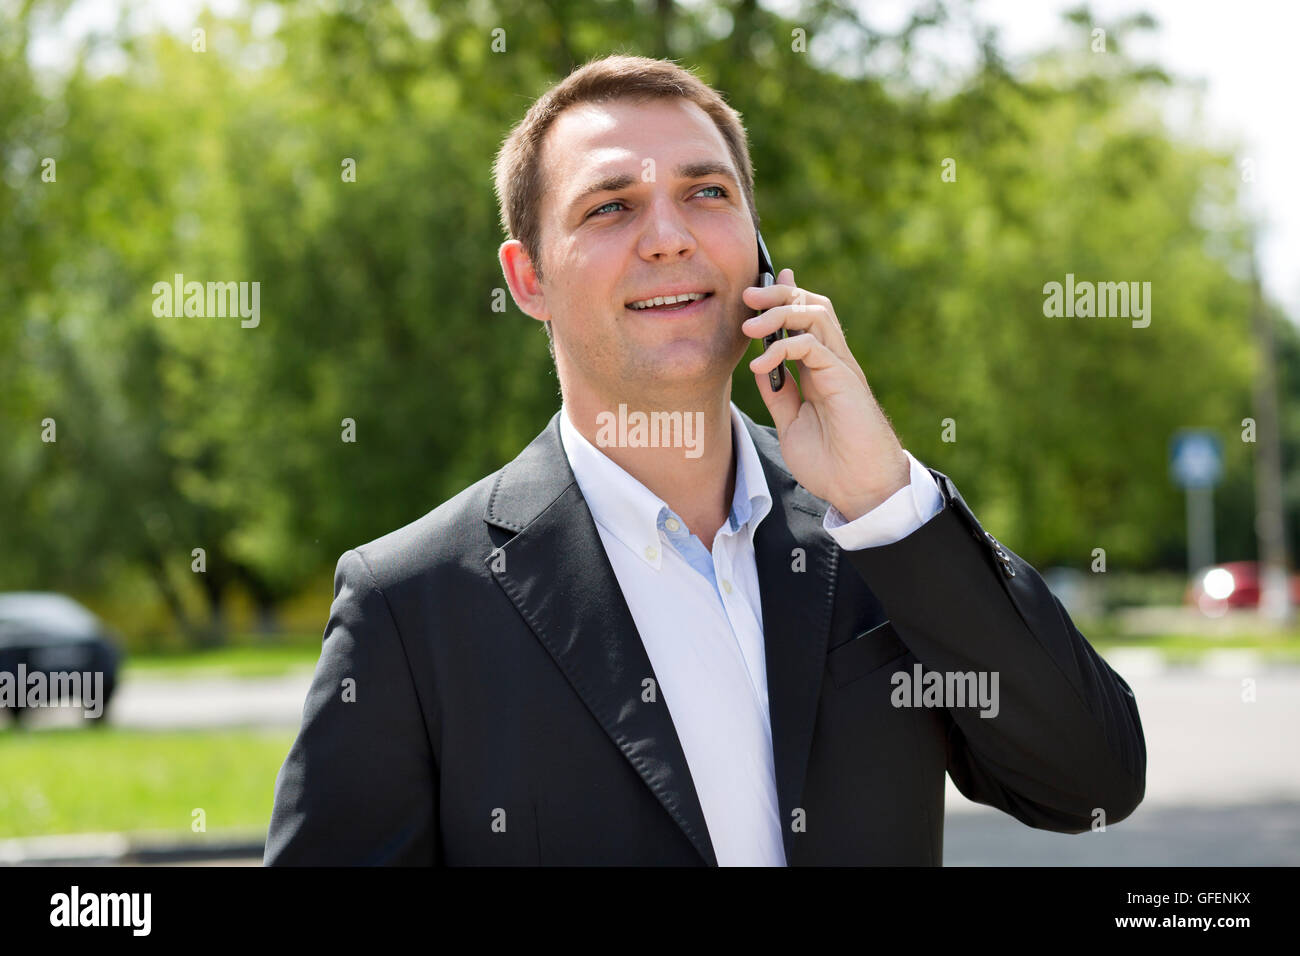 Young urban professional man talking on smart phone. Close up portrait of male business man on smart phone outdoors in suit Stock Photo